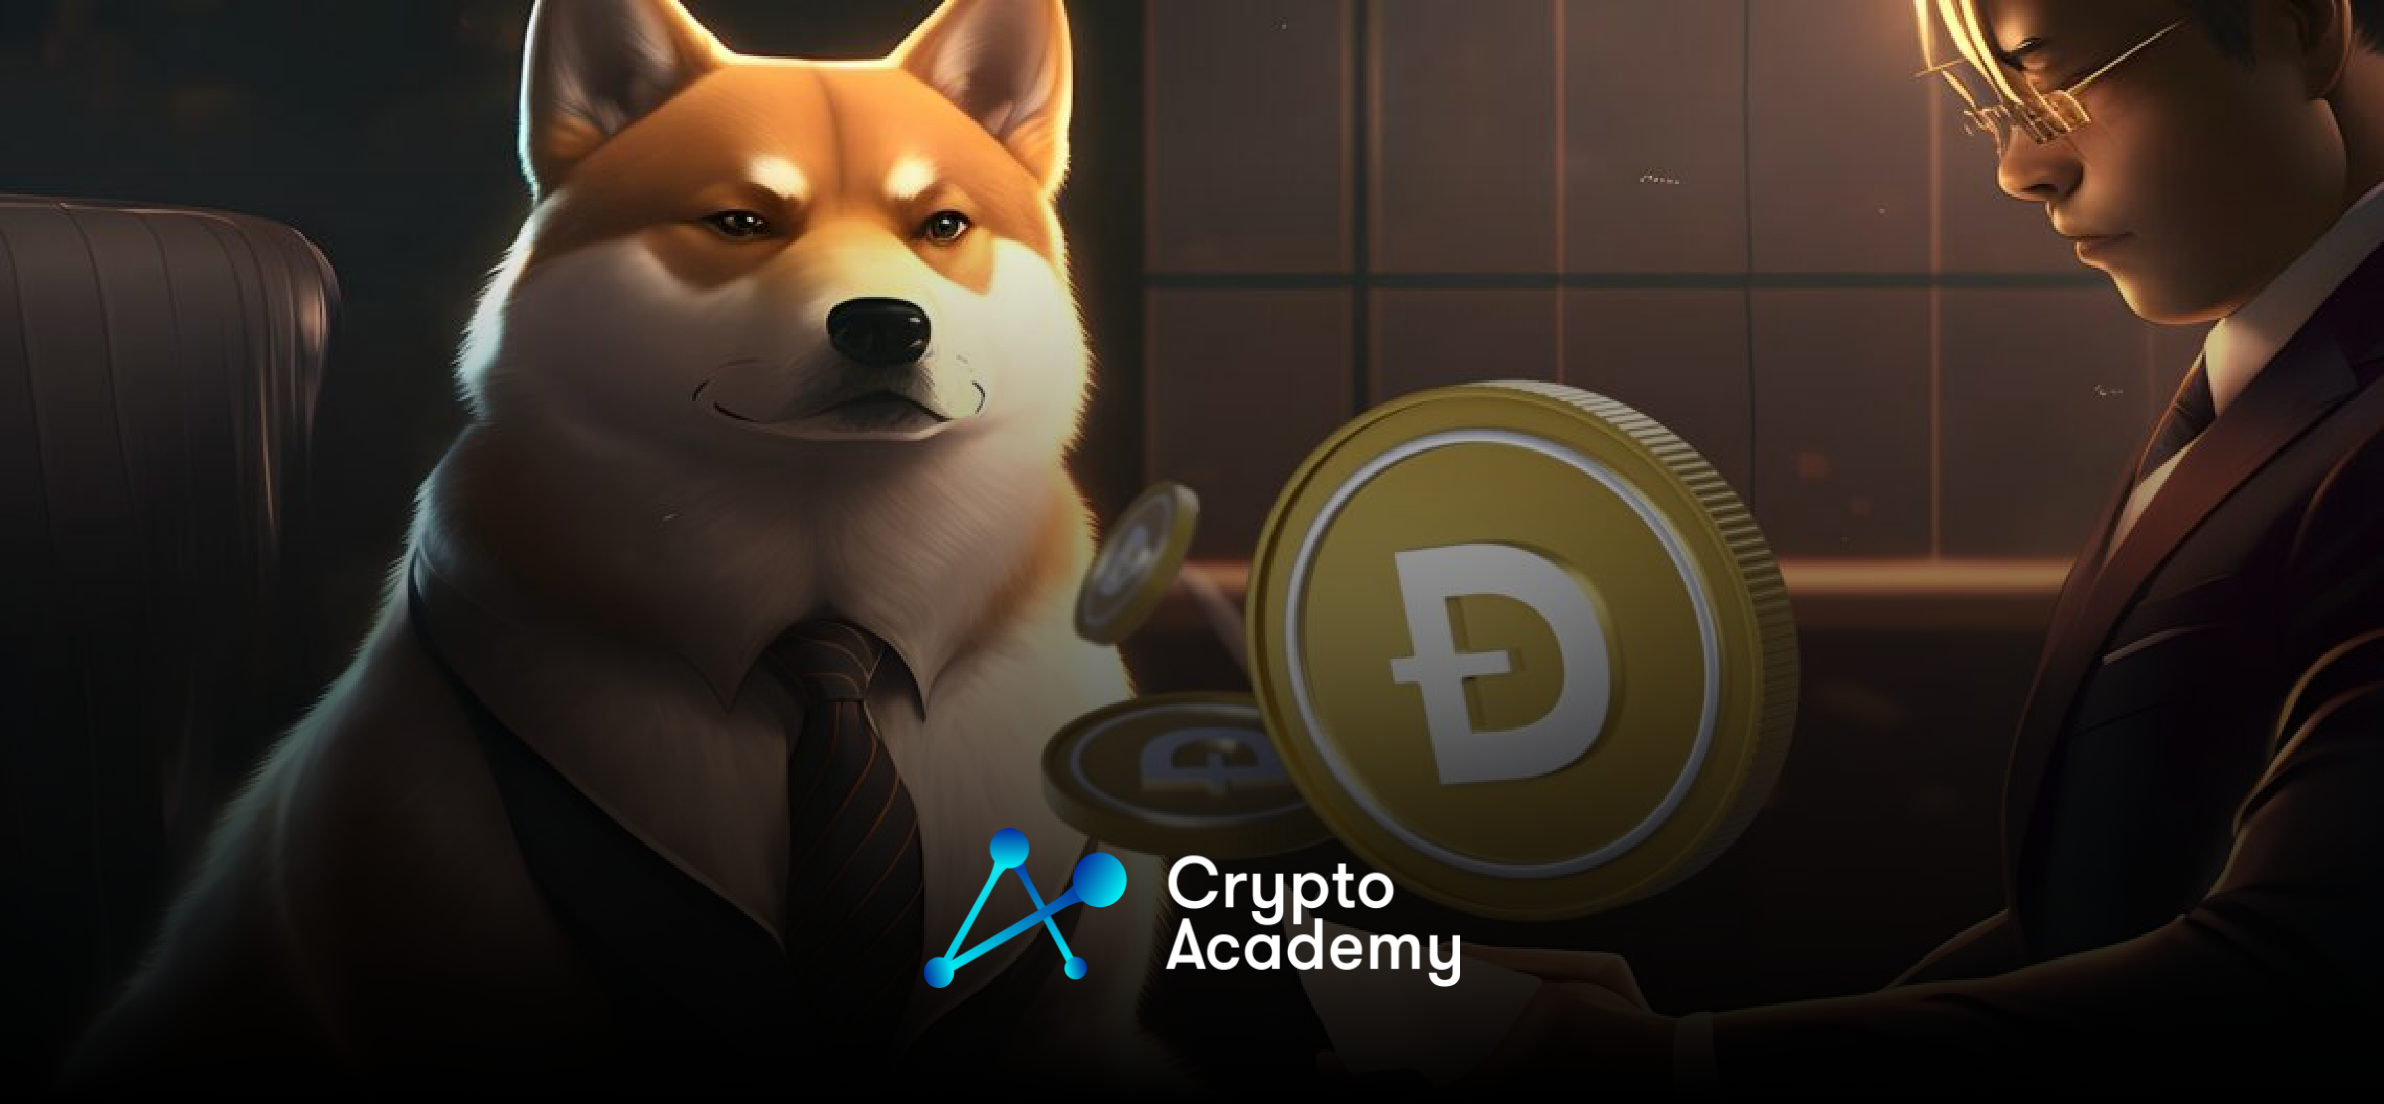 Japan to Install a Dogecoin Statue in November